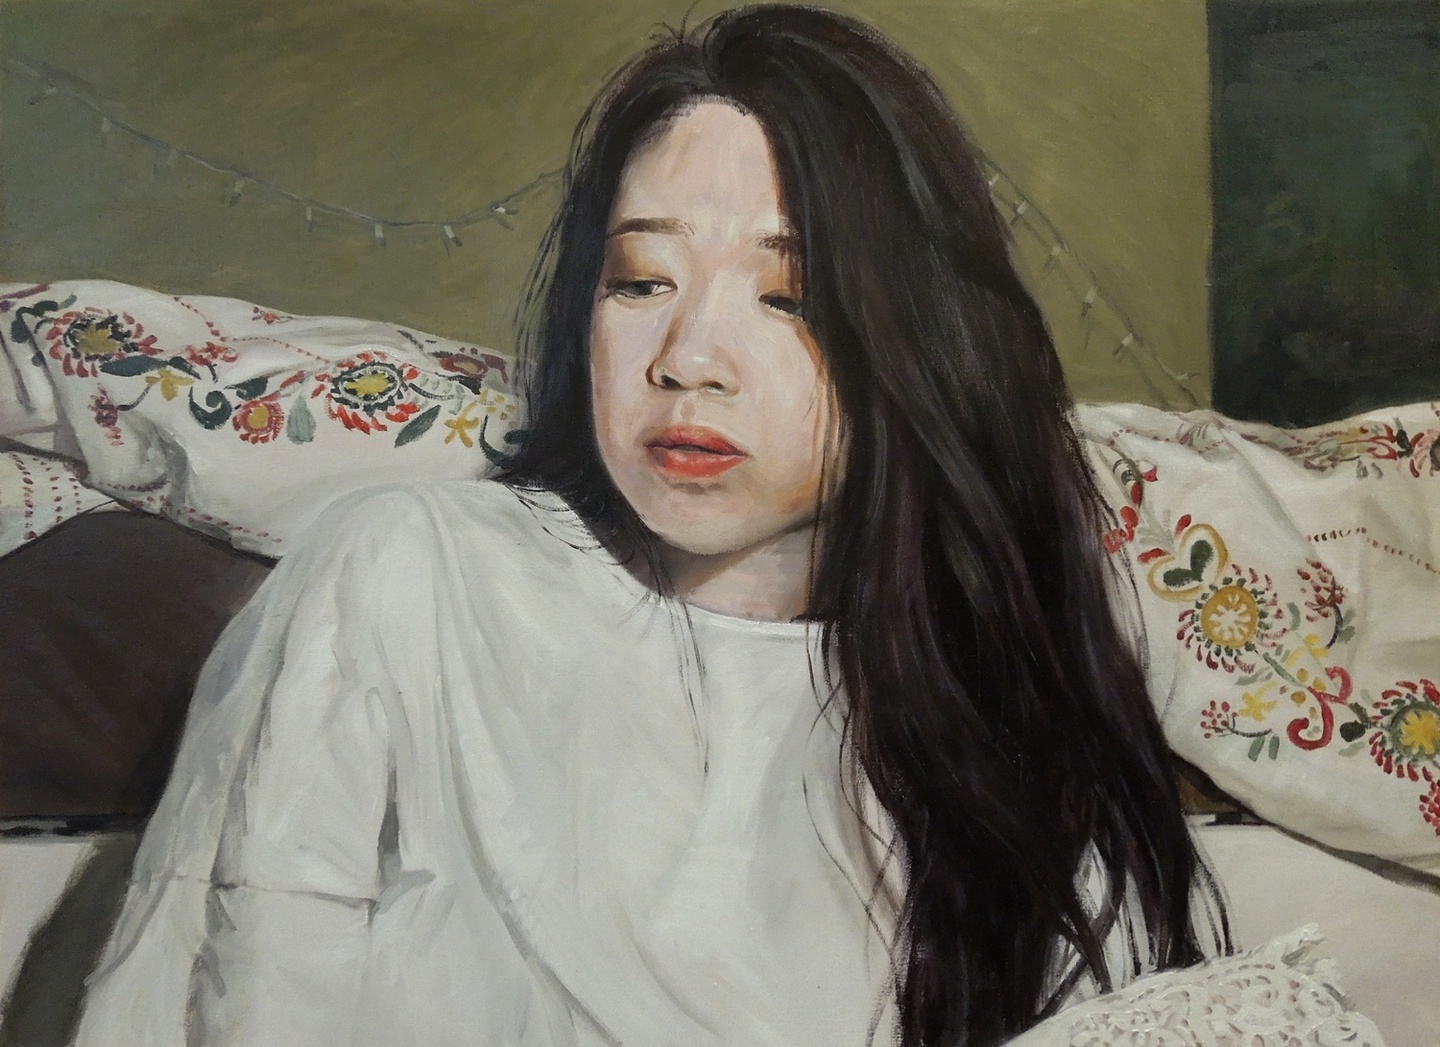 Painted portrait of a person with long dark hair in a white loose shirt, from the chest up, sitting on a bed with a white embroidered comforter, with their gaze cast down.